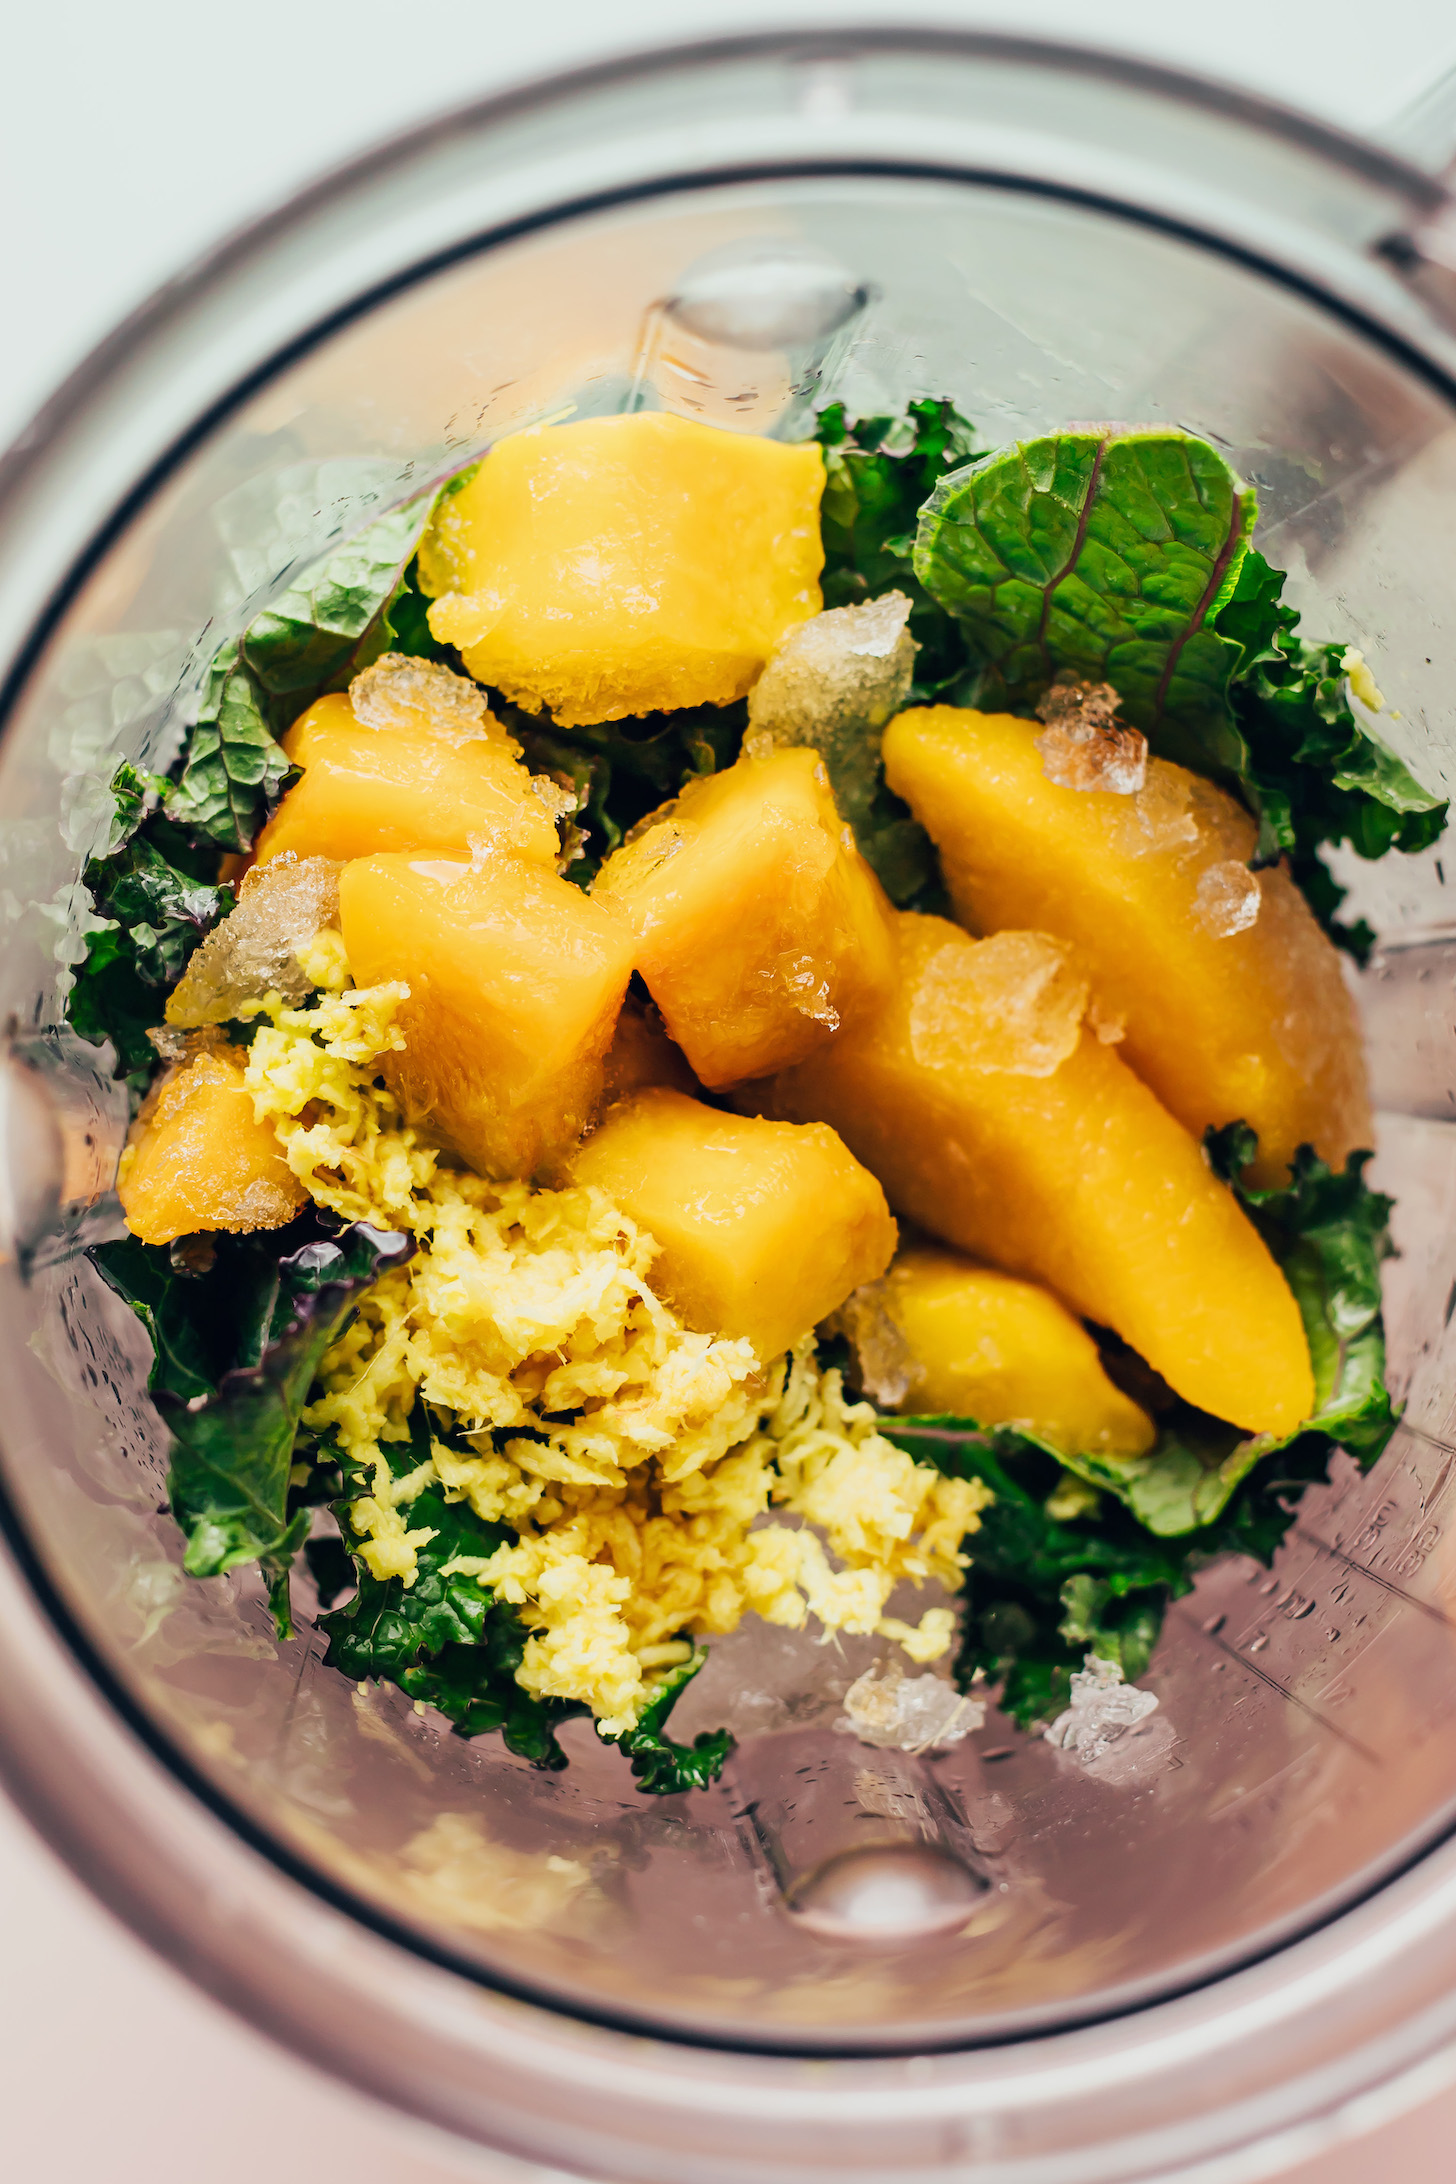 Blender with mango, peach, ginger, kale, and ice